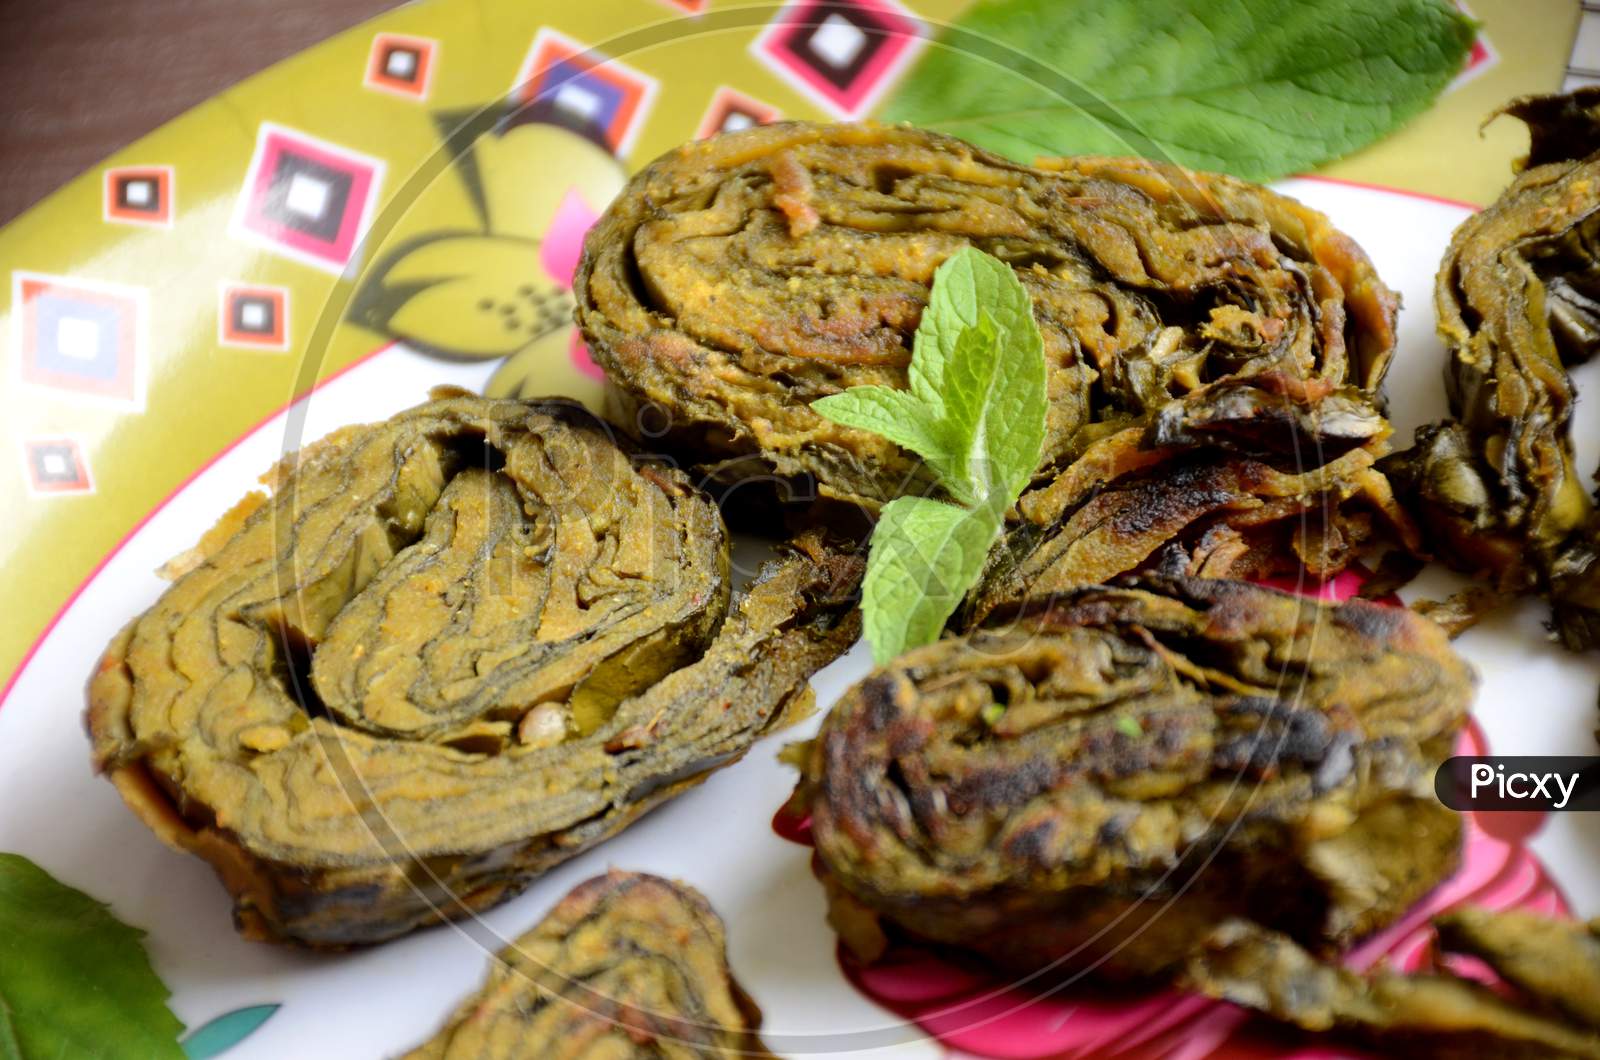 Closeup The Fried Arabic Leaves Food With Green Mint In The Plate Over Out Of Focus White Pink Background.